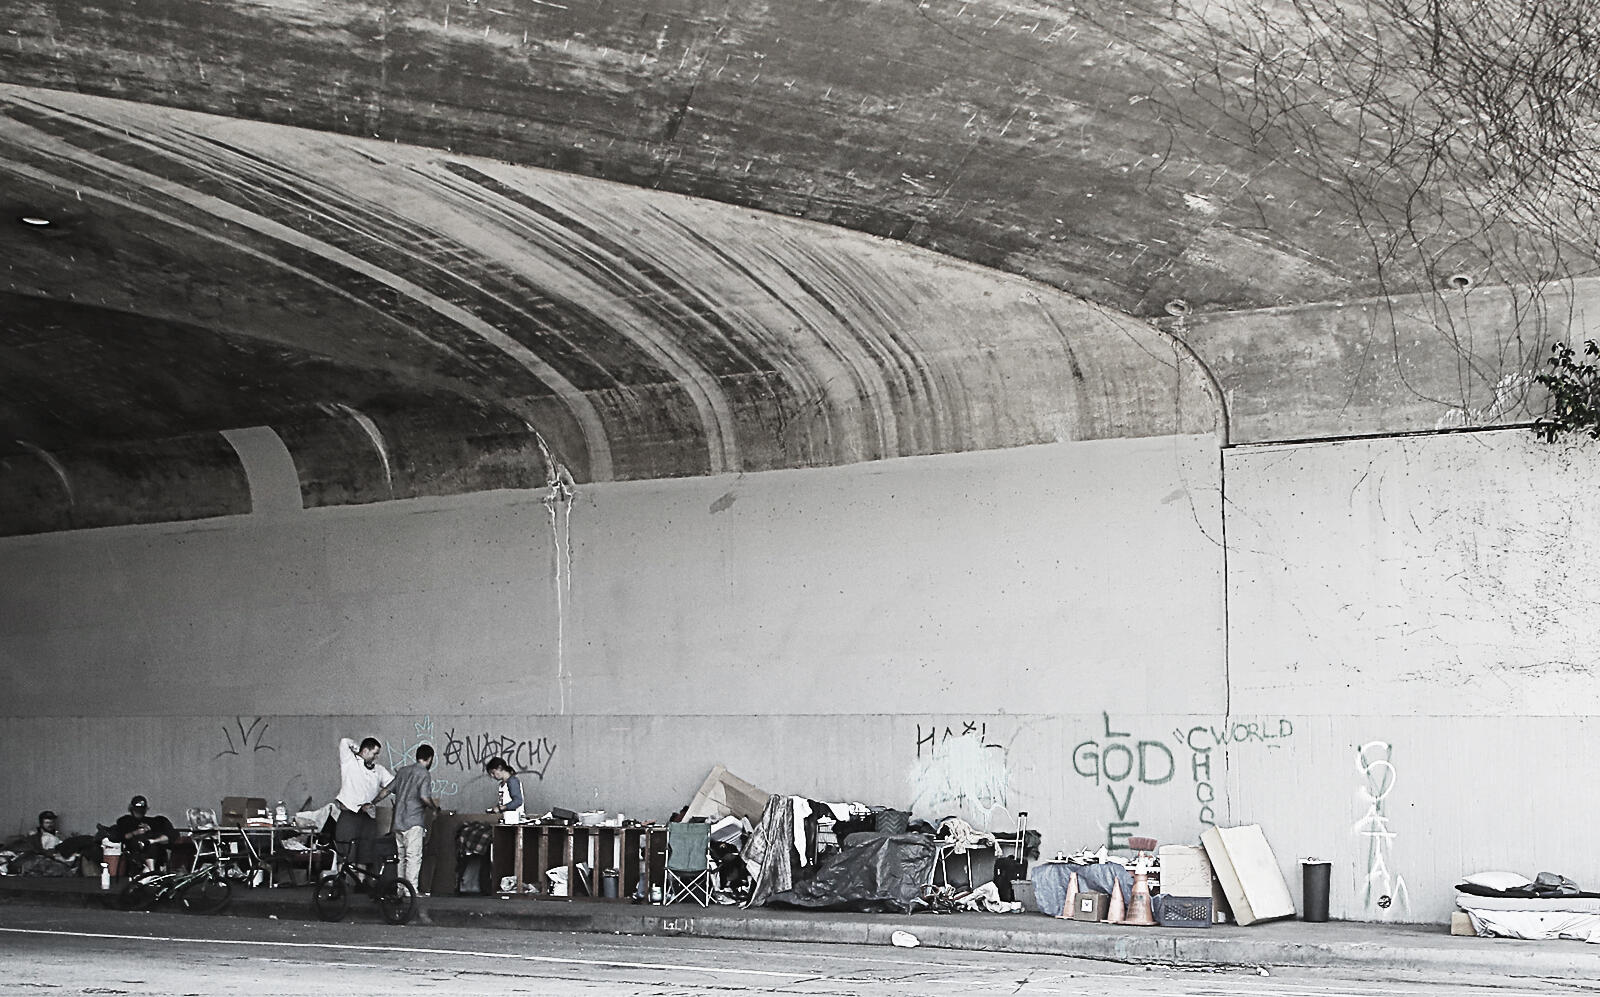 A homeless encampment under the 101 Freeway (Getty)